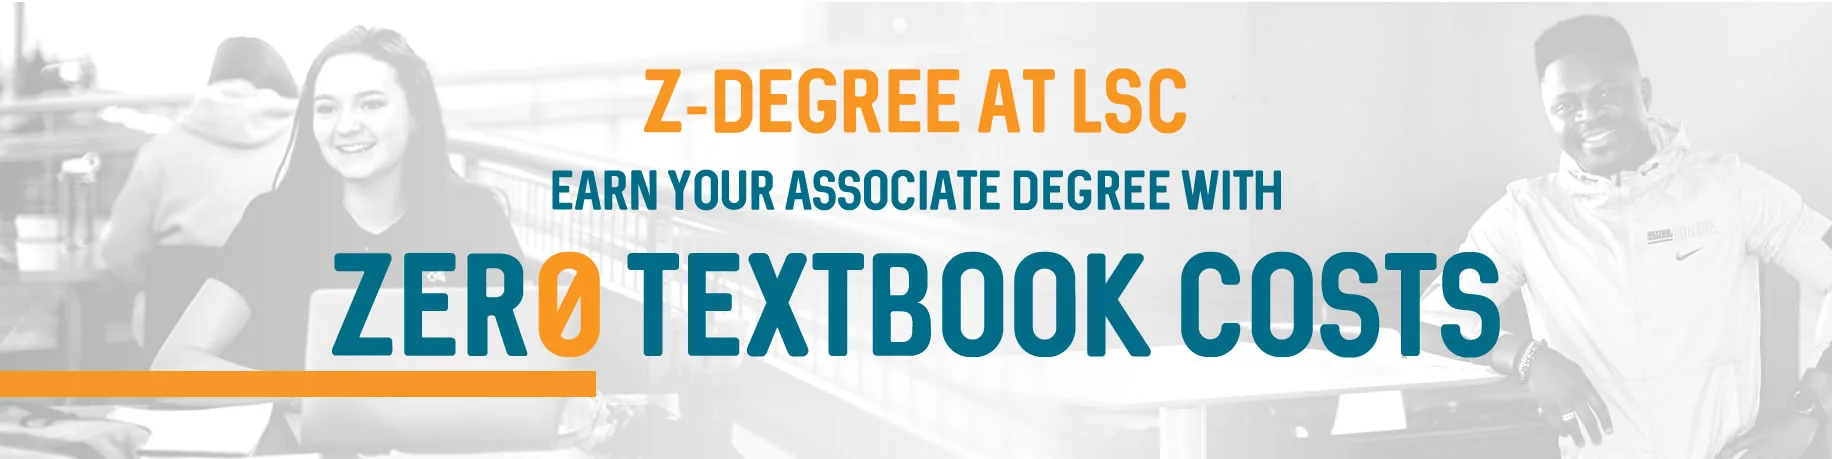 Z-Degree at Lake Superior College. Earn your Associate Degree with Zero Textbook Costs.